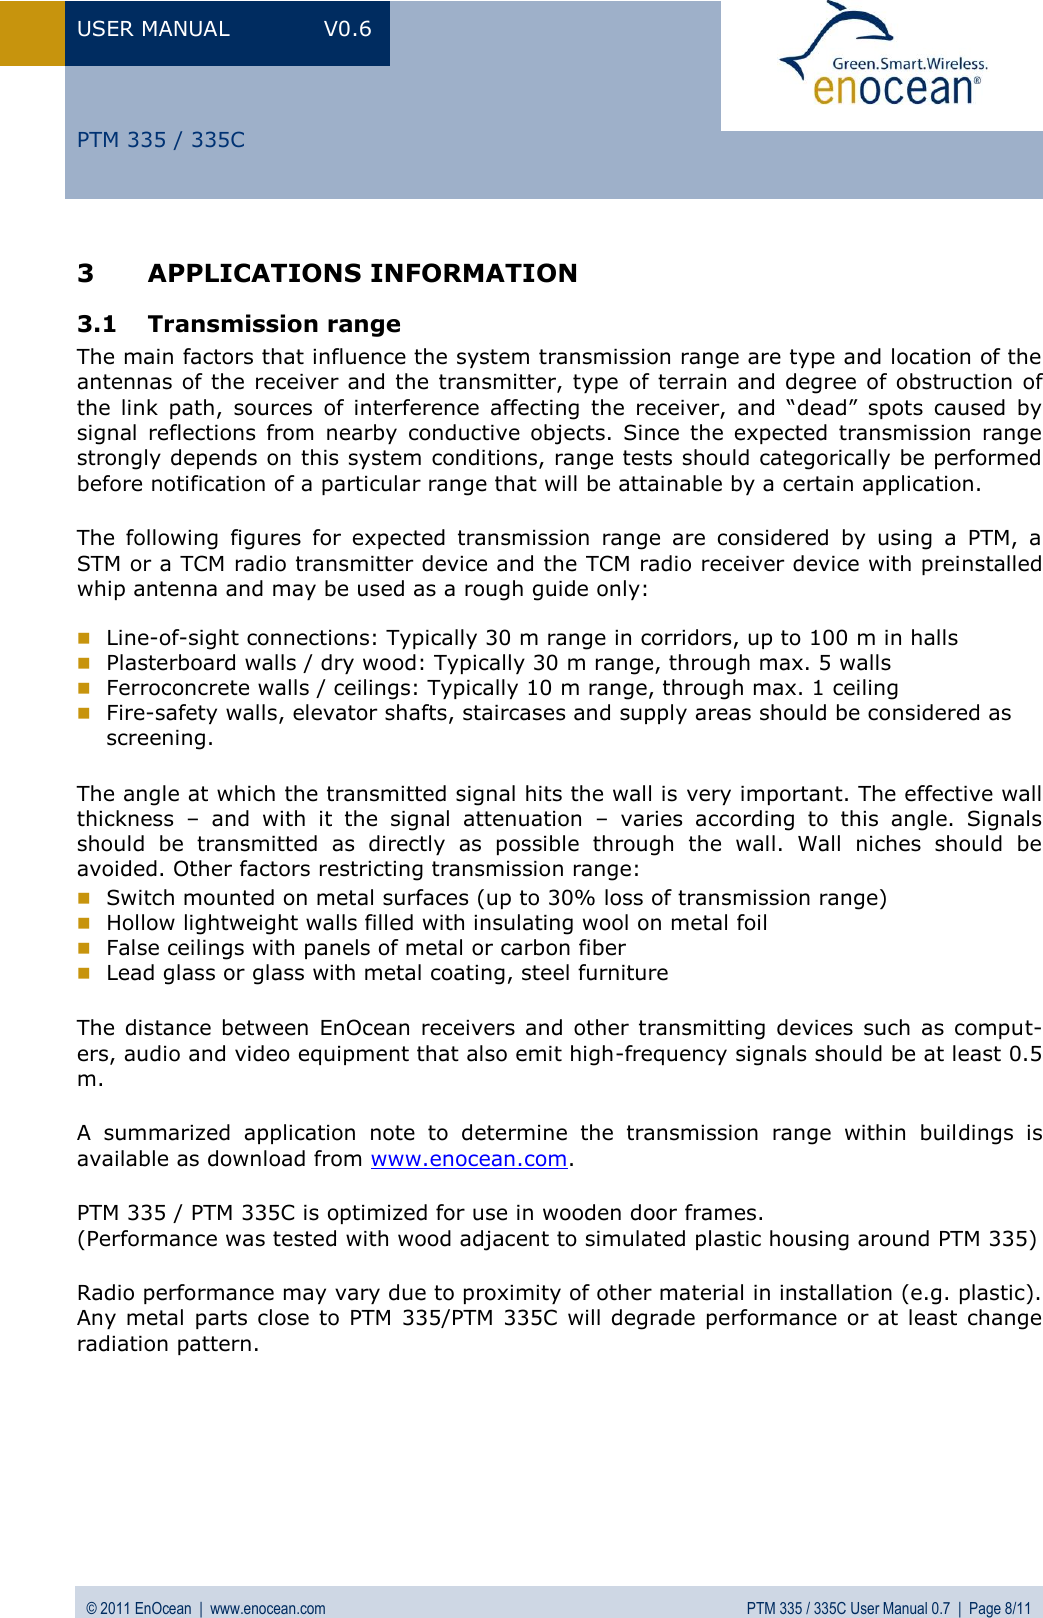 USER MANUAL  V0.6 © 2011 EnOcean  |  www.enocean.com  PTM 335 / 335C User Manual 0.7  |  Page 8/11   PTM 335 / 335C 3 APPLICATIONS INFORMATION 3.1 Transmission range The main factors that influence the system transmission range are type and location of the antennas of the receiver and the transmitter, type  of terrain and degree of obstruction of the  link  path,  sources  of  interference  affecting  the  receiver,  and  “dead”  spots  caused  by signal  reflections  from  nearby  conductive  objects.  Since  the  expected  transmission  range strongly depends on this system conditions, range tests should categorically be performed before notification of a particular range that will be attainable by a certain application. The  following  figures  for  expected  transmission  range  are  considered  by  using  a  PTM,  a STM or a TCM radio transmitter device and the TCM radio receiver device with preinstalled whip antenna and may be used as a rough guide only:   Line-of-sight connections: Typically 30 m range in corridors, up to 100 m in halls  Plasterboard walls / dry wood: Typically 30 m range, through max. 5 walls  Ferroconcrete walls / ceilings: Typically 10 m range, through max. 1 ceiling  Fire-safety walls, elevator shafts, staircases and supply areas should be considered as screening.  The angle at which the transmitted signal hits the wall is very important. The effective wall thickness  –  and  with  it  the  signal  attenuation  –  varies  according  to  this  angle.  Signals should  be  transmitted  as  directly  as  possible  through  the  wall.  Wall  niches  should  be avoided. Other factors restricting transmission range:  Switch mounted on metal surfaces (up to 30% loss of transmission range)  Hollow lightweight walls filled with insulating wool on metal foil  False ceilings with panels of metal or carbon fiber  Lead glass or glass with metal coating, steel furniture The distance between  EnOcean  receivers  and other  transmitting  devices such  as comput-ers, audio and video equipment that also emit high-frequency signals should be at least 0.5 m. A  summarized  application  note  to  determine  the  transmission  range  within  buildings  is available as download from www.enocean.com. PTM 335 / PTM 335C is optimized for use in wooden door frames. (Performance was tested with wood adjacent to simulated plastic housing around PTM 335)  Radio performance may vary due to proximity of other material in installation (e.g. plastic). Any metal  parts close to PTM 335/PTM 335C will  degrade performance or at least change radiation pattern. 